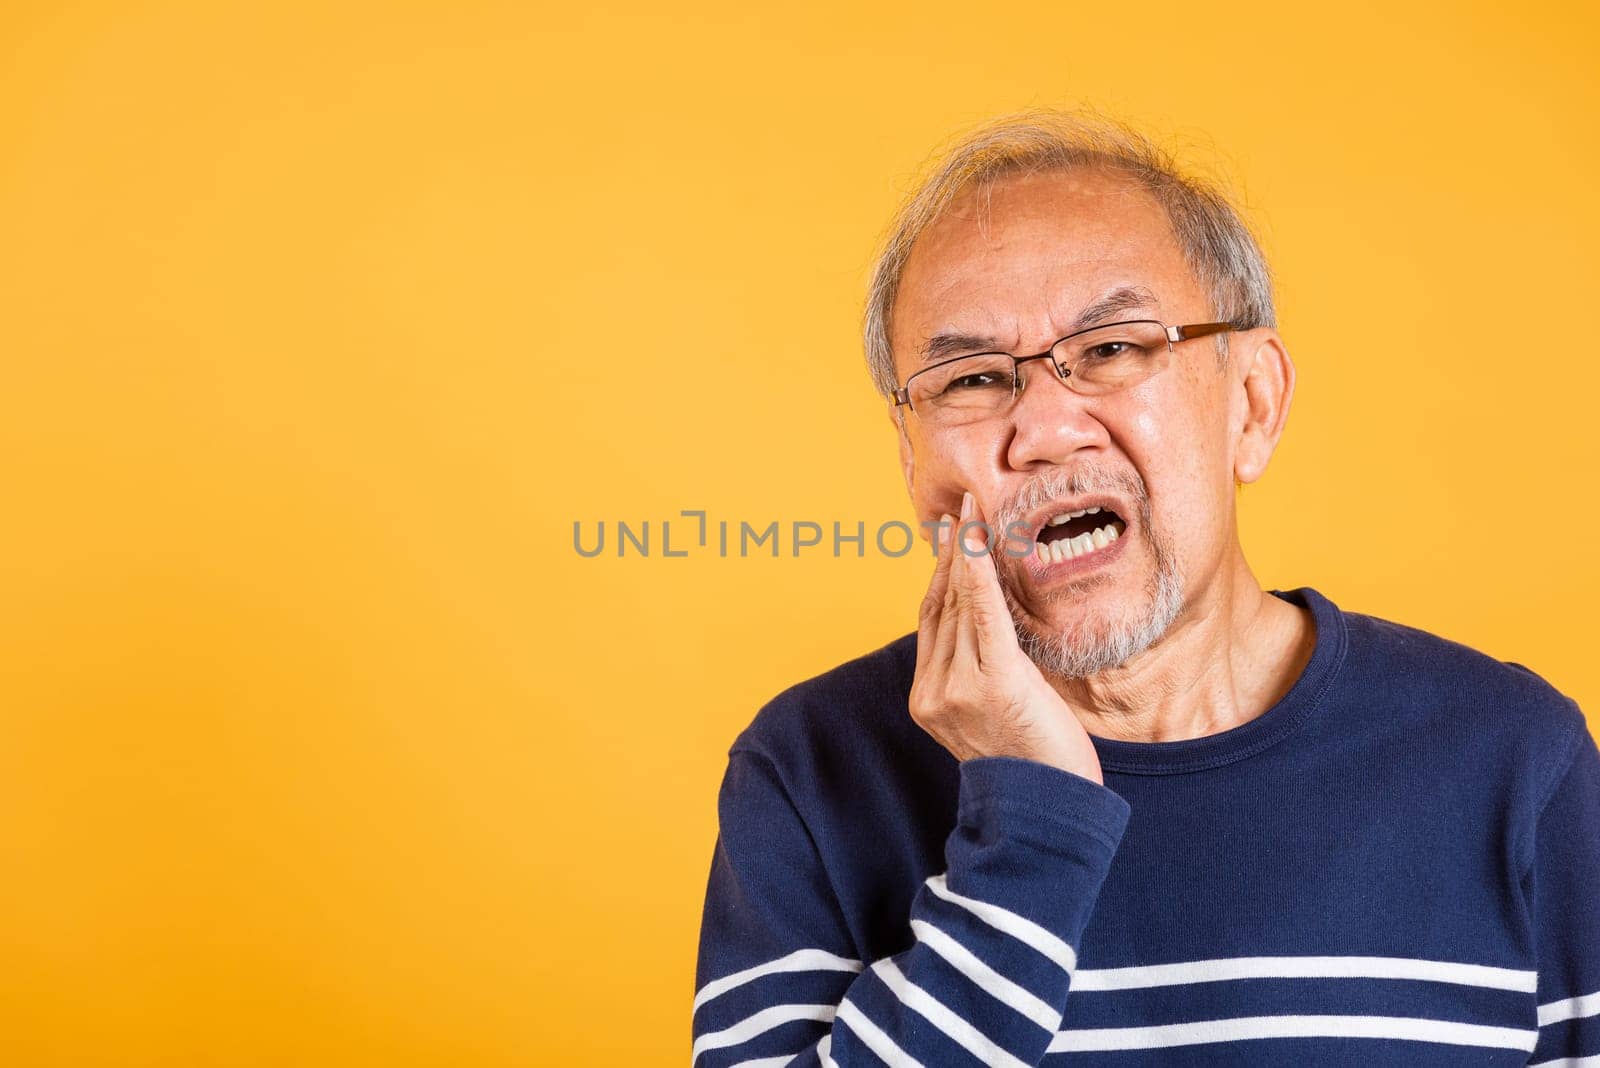 Dental pain. Portrait senior old man sad hand touching cheek suffering from toothache studio shot isolated on yellow background, Asian unhappy elder man problems with teeth pain, dental healthcare